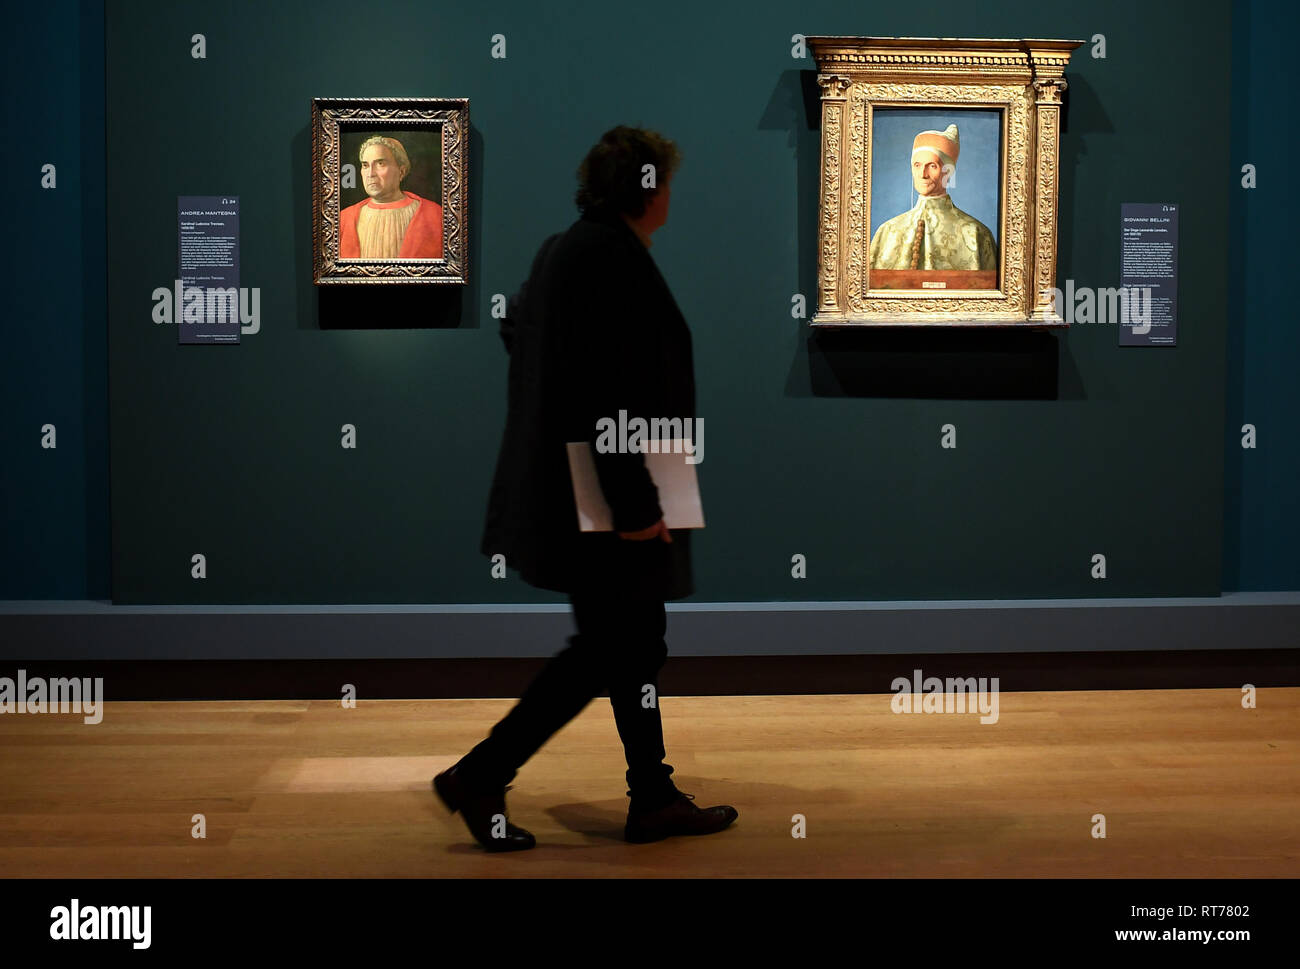 Berlin, Germany. 28th Feb, 2019. A visitor looks at the exhibition 'Mantegna and Bellini. Master of the Renaissance' in the Picture Gallery at the Cultural Forum the painting 'Cardinal Ludovico Trevisan (l)' by Andrea Mantegna and 'The Doge Leonardo Loredan' by Giovanni Bellini. The special exhibition of the National Museums in Berlin and the National Gallery London in cooperation with the British Museum runs from 01.03.2019 to 30.06.2019. Credit: Britta Pedersen/dpa/Alamy Live News Stock Photo